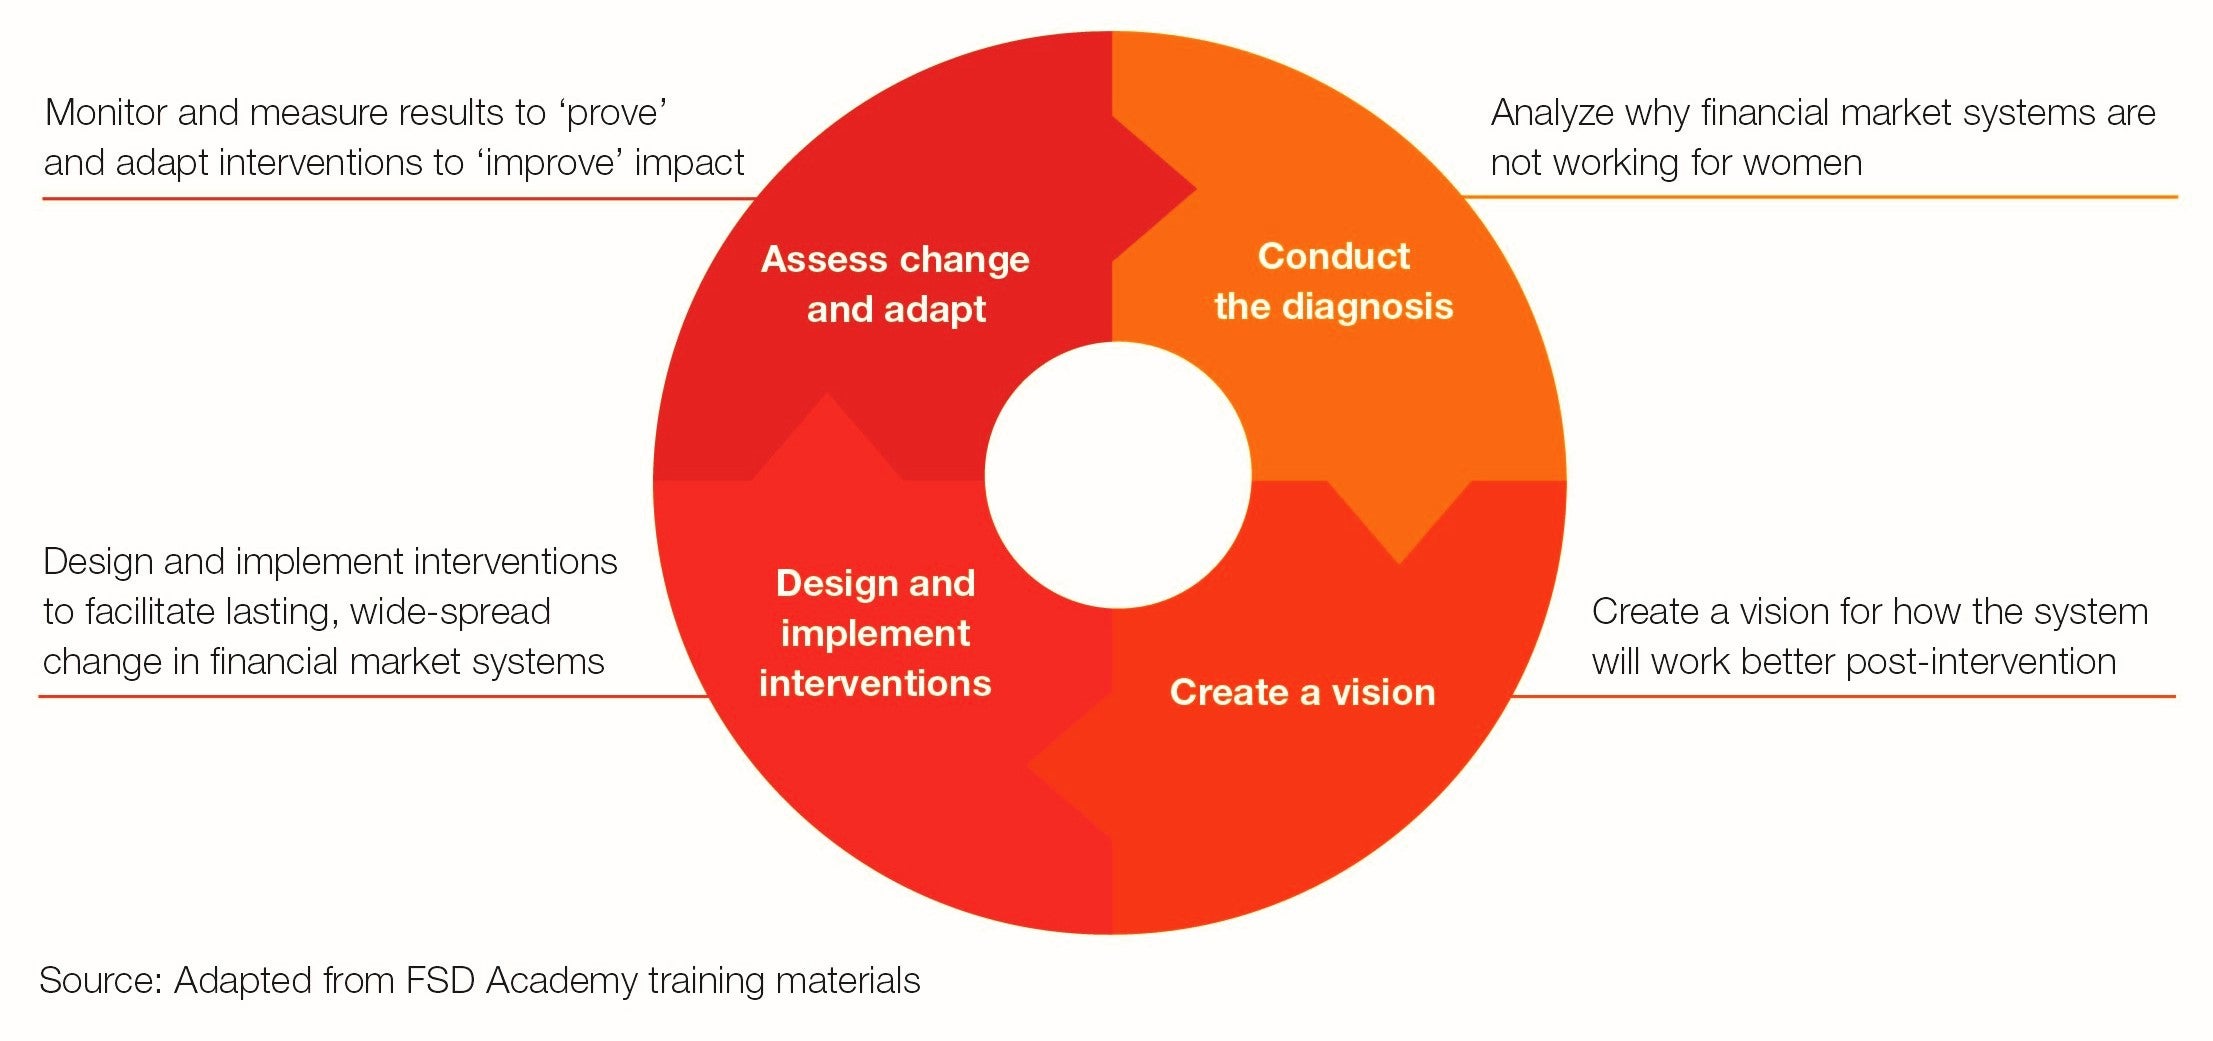 Designing and implementing interventions following the market systems project cycle